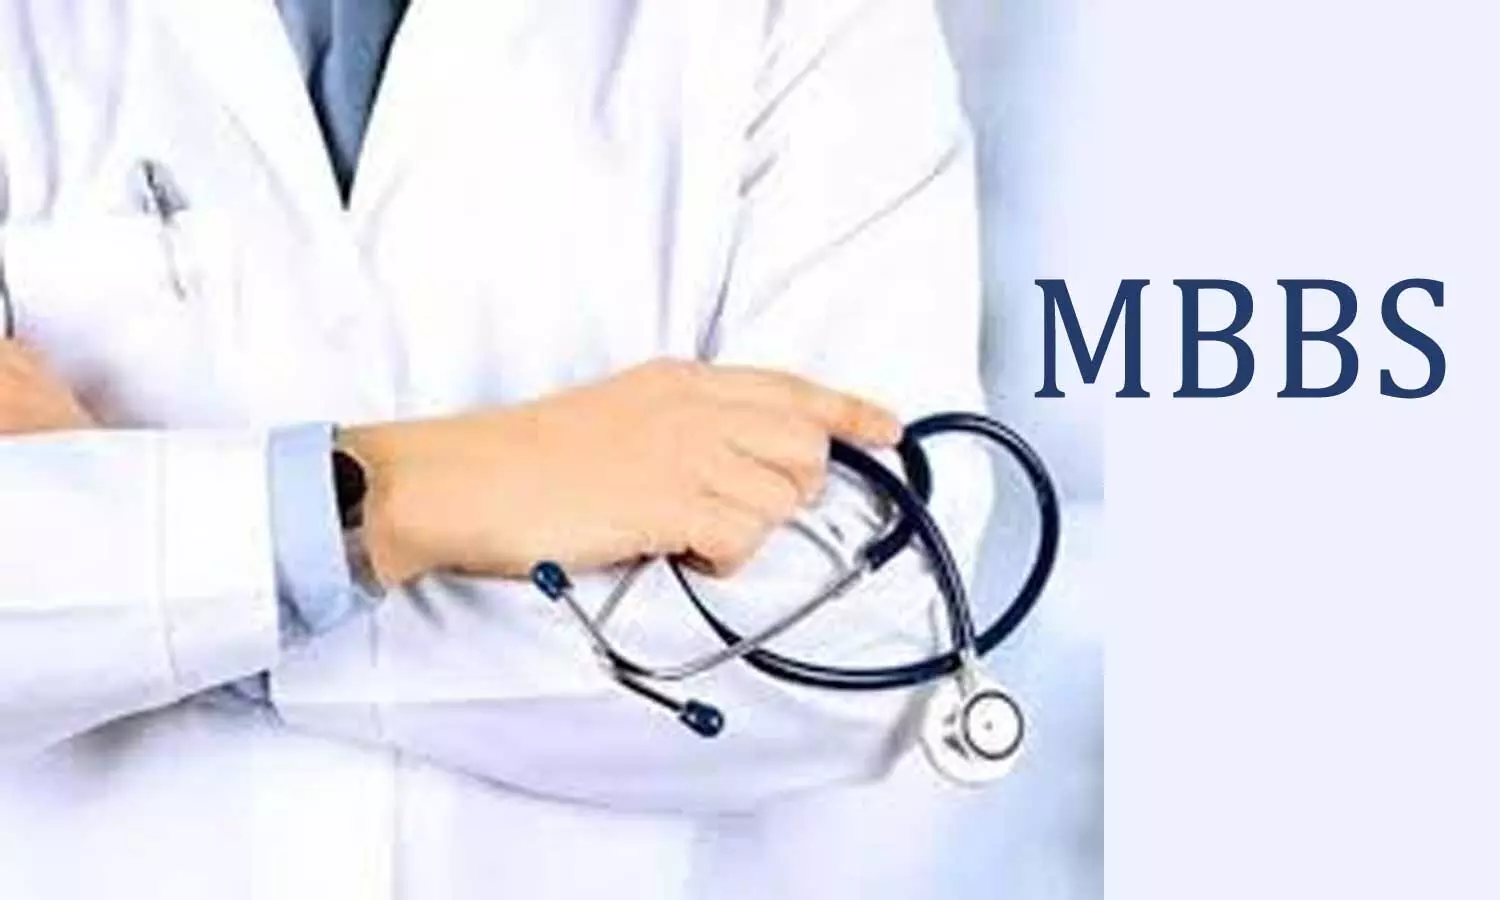 MBBS exams during COVID-19: NMC issues advisory, gives certain relief